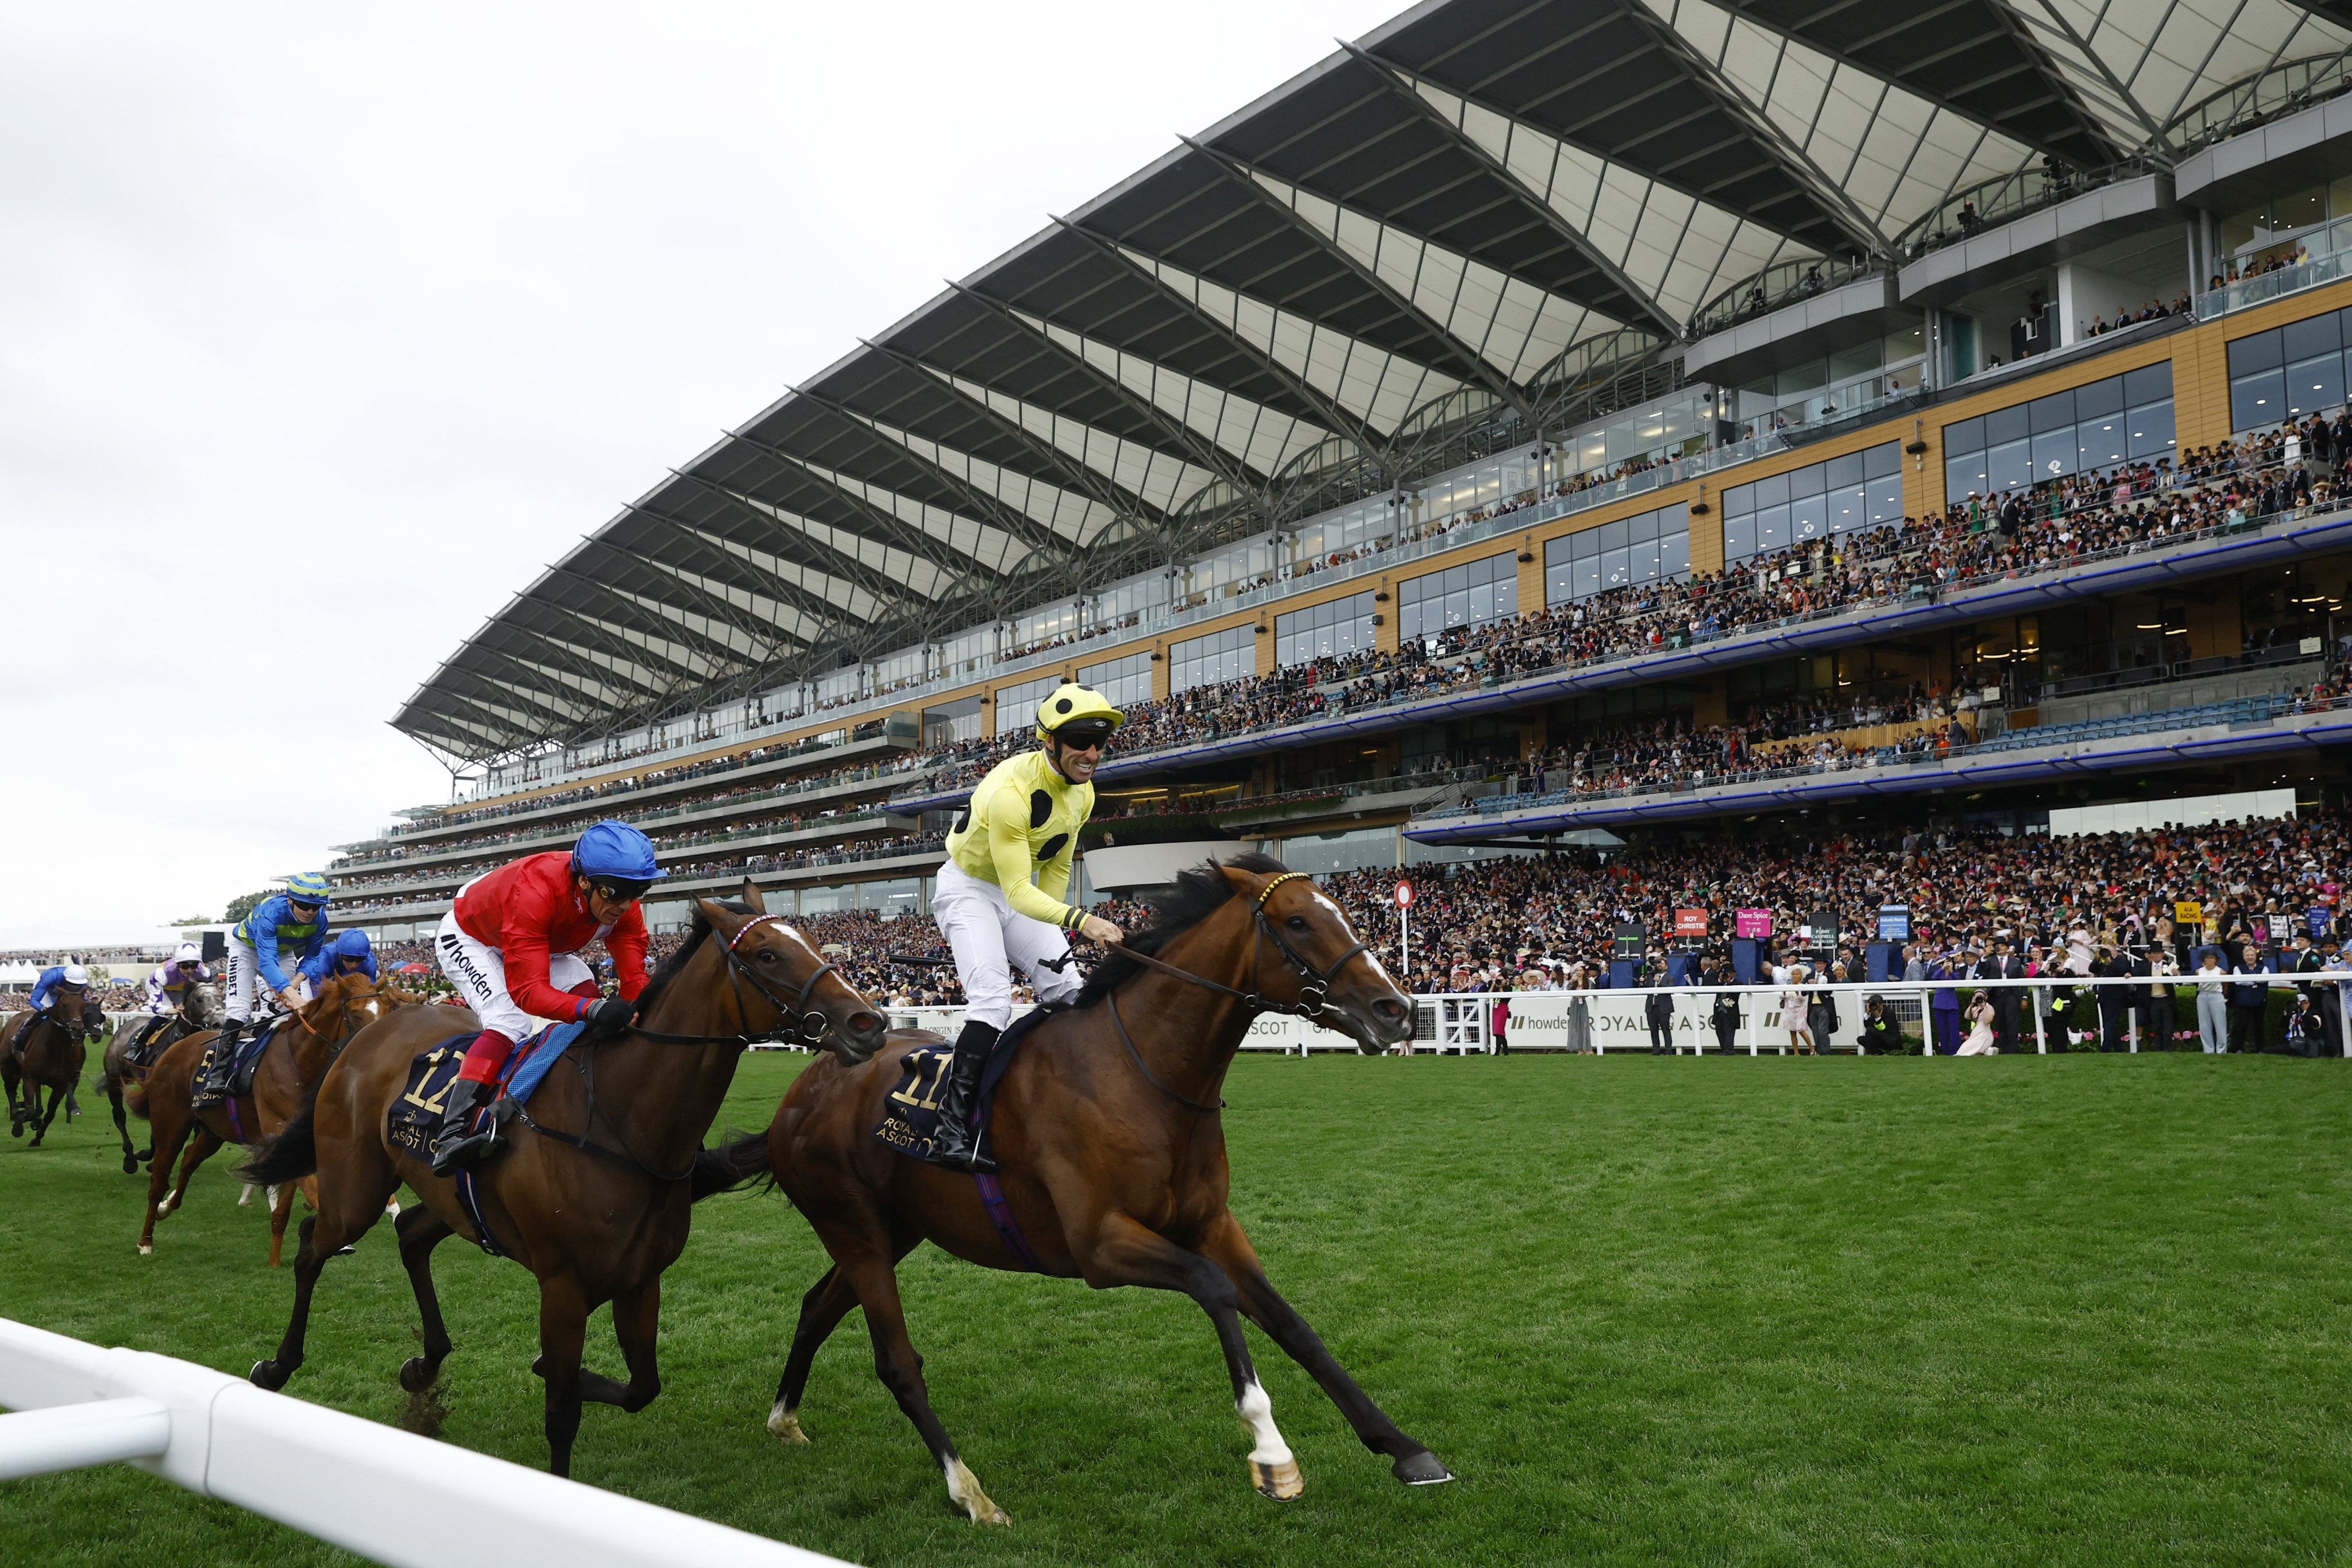 Neil Callan is all smiles as Triple Time wins the Queen Anne Stakes at Royal Ascot on Tuesday. Photo: Reuters